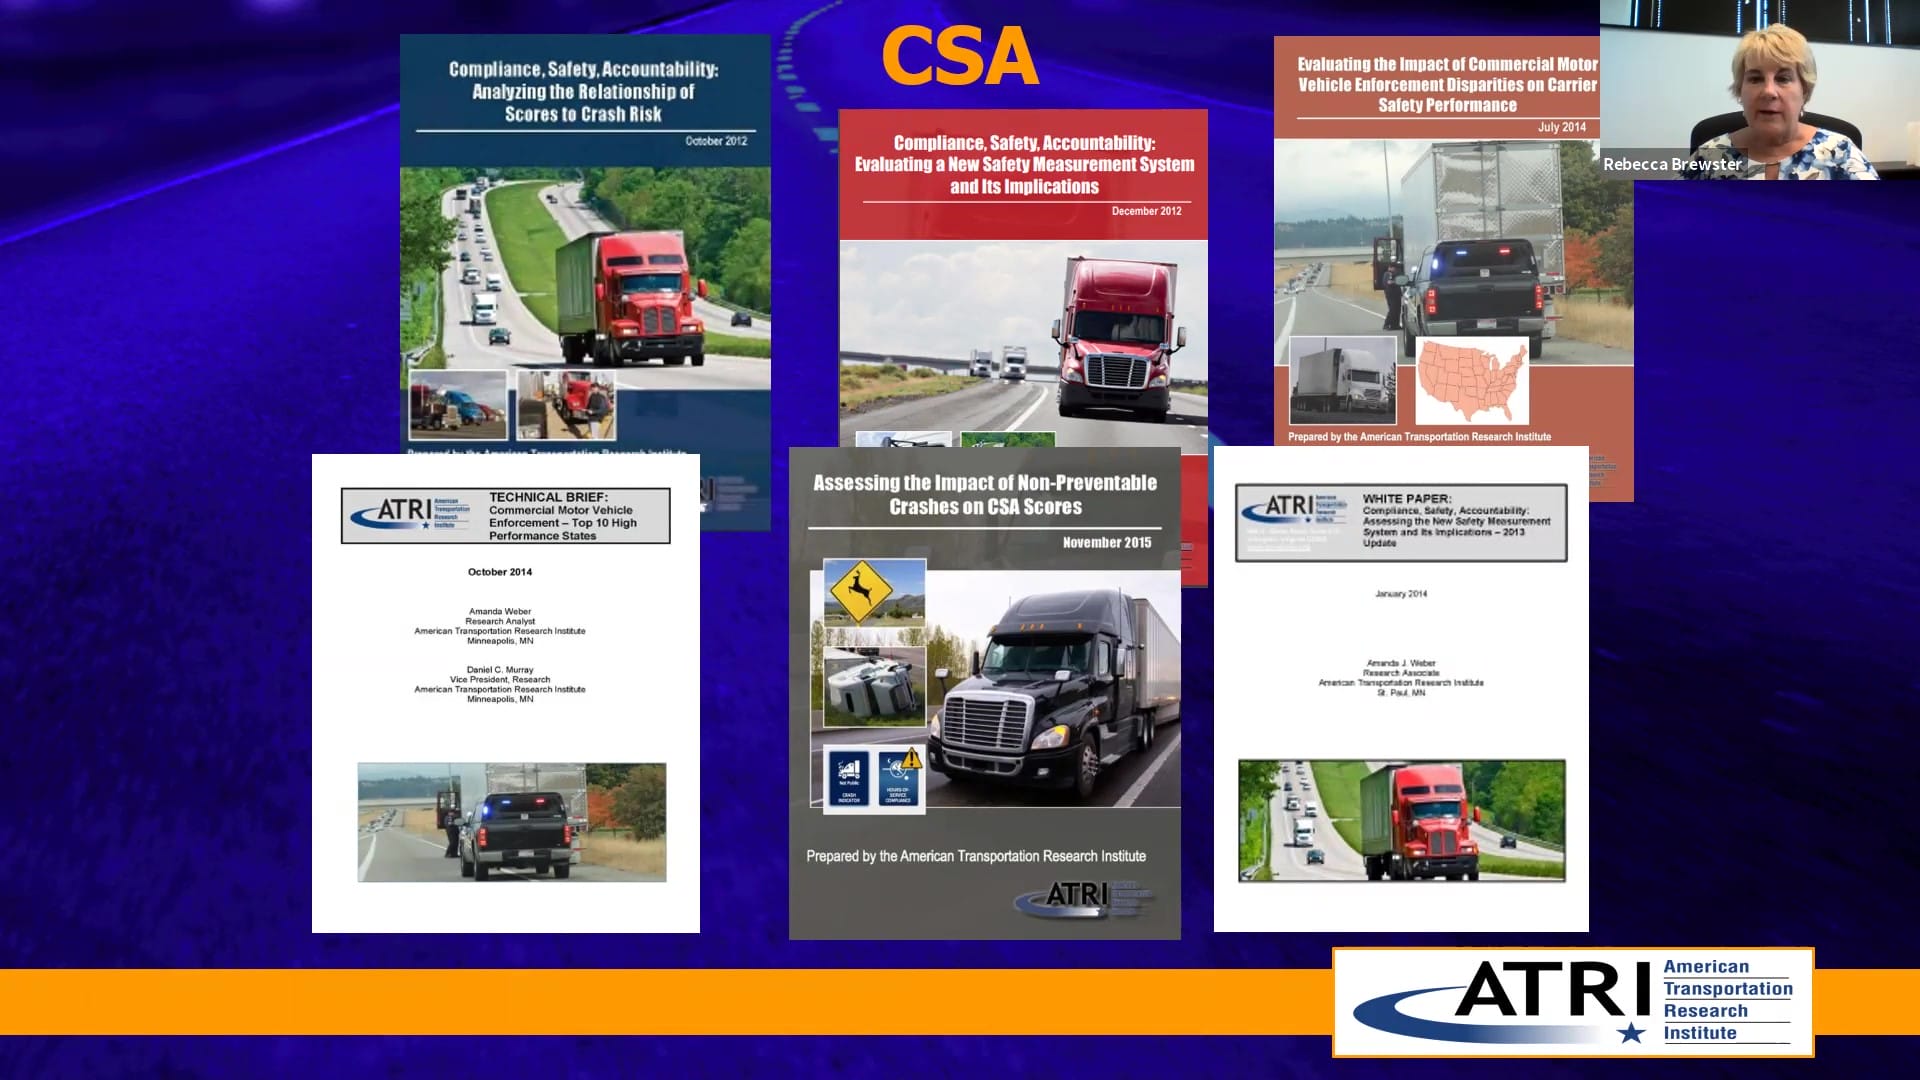 Trucking Industry Concerns 2020 from ATRI CSA